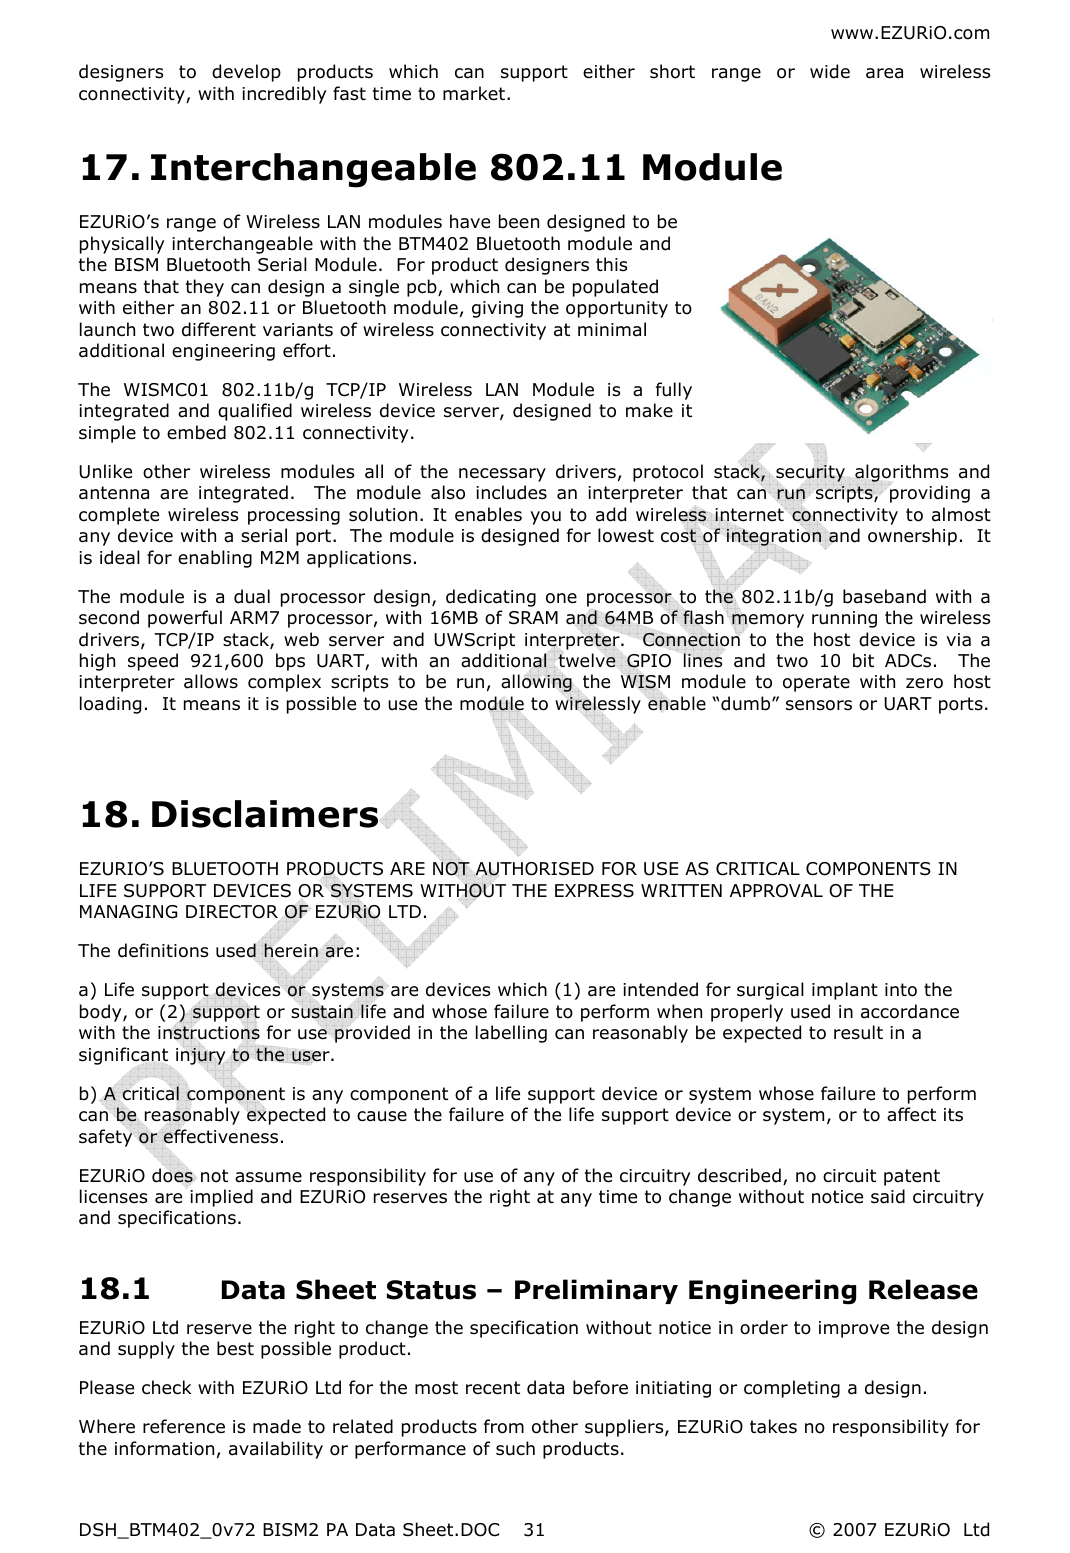 www.EZURiO.com DSH_BTM402_0v72 BISM2 PA Data Sheet.DOC  © 2007 EZURiO  Ltd  31designers  to  develop  products  which  can  support  either  short  range  or  wide  area  wireless connectivity, with incredibly fast time to market. 17. Interchangeable 802.11 Module EZURiO’s range of Wireless LAN modules have been designed to be physically interchangeable with the BTM402 Bluetooth module and the BISM Bluetooth Serial Module.  For product designers this means that they can design a single pcb, which can be populated with either an 802.11 or Bluetooth module, giving the opportunity to launch two different variants of wireless connectivity at minimal additional engineering effort. The  WISMC01  802.11b/g  TCP/IP  Wireless  LAN  Module  is  a  fully integrated and qualified wireless device server, designed to make it simple to embed 802.11 connectivity.  Unlike  other  wireless  modules  all  of  the  necessary  drivers,  protocol  stack,  security  algorithms  and antenna  are  integrated.    The  module  also  includes  an  interpreter  that  can  run  scripts,  providing  a complete wireless processing solution. It enables you to add wireless internet connectivity to almost any device with a serial port.  The module is designed for lowest cost of integration and ownership.  It is ideal for enabling M2M applications. The module is a dual processor design, dedicating  one processor to the 802.11b/g baseband with a second powerful ARM7 processor, with 16MB of SRAM and 64MB of flash memory running the wireless drivers,  TCP/IP  stack, web server  and UWScript interpreter.    Connection to the host device is via a high  speed  921,600  bps  UART,  with  an  additional  twelve  GPIO  lines  and  two  10  bit  ADCs.    The interpreter  allows  complex  scripts  to  be  run,  allowing  the  WISM  module  to  operate  with  zero  host loading.  It means it is possible to use the module to wirelessly enable “dumb” sensors or UART ports.  18. Disclaimers EZURIO’S BLUETOOTH PRODUCTS ARE NOT AUTHORISED FOR USE AS CRITICAL COMPONENTS IN LIFE SUPPORT DEVICES OR SYSTEMS WITHOUT THE EXPRESS WRITTEN APPROVAL OF THE MANAGING DIRECTOR OF EZURiO LTD. The definitions used herein are: a) Life support devices or systems are devices which (1) are intended for surgical implant into the body, or (2) support or sustain life and whose failure to perform when properly used in accordance with the instructions for use provided in the labelling can reasonably be expected to result in a significant injury to the user. b) A critical component is any component of a life support device or system whose failure to perform can be reasonably expected to cause the failure of the life support device or system, or to affect its safety or effectiveness. EZURiO does not assume responsibility for use of any of the circuitry described, no circuit patent licenses are implied and EZURiO reserves the right at any time to change without notice said circuitry and specifications. 18.1 Data Sheet Status – Preliminary Engineering Release EZURiO Ltd reserve the right to change the specification without notice in order to improve the design and supply the best possible product. Please check with EZURiO Ltd for the most recent data before initiating or completing a design. Where reference is made to related products from other suppliers, EZURiO takes no responsibility for the information, availability or performance of such products.  